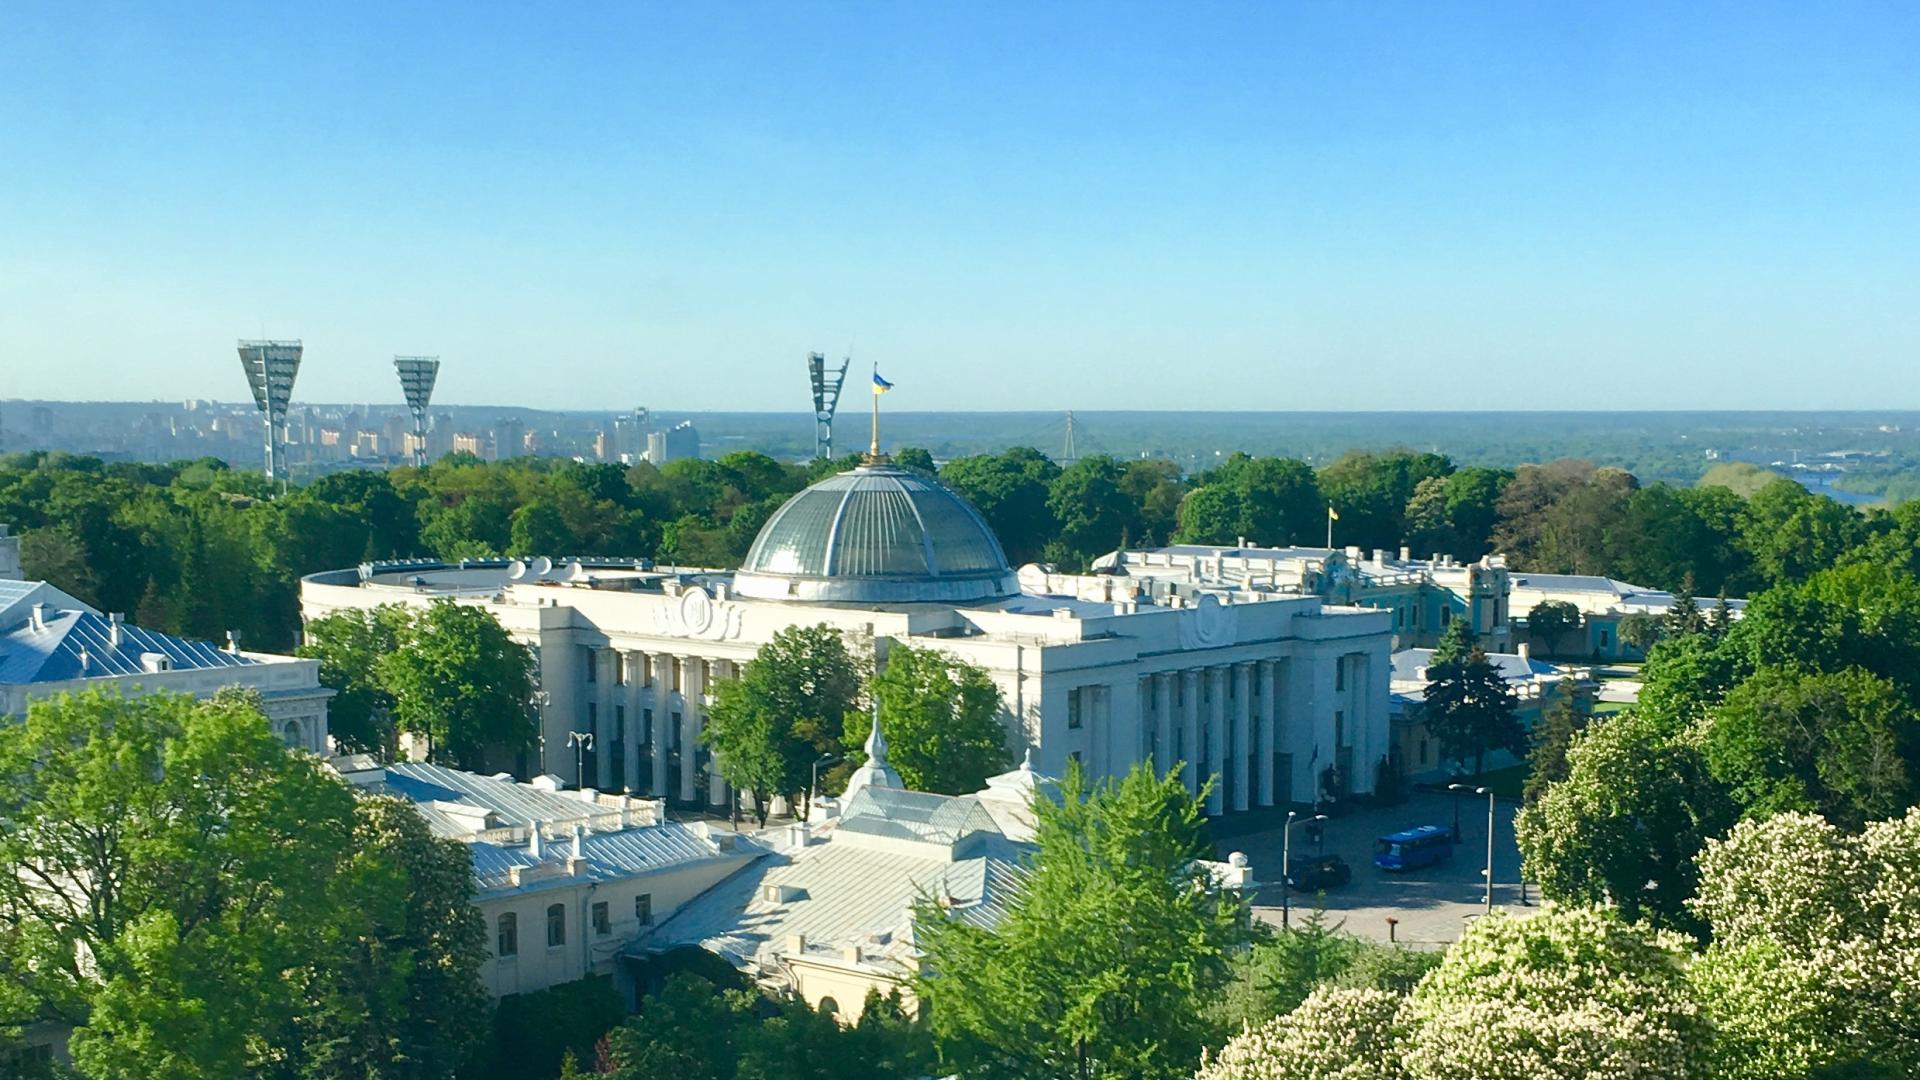 The Verkhovna Rada of Ukraine with the Ukrainian flag flying above the dome on a sunny day